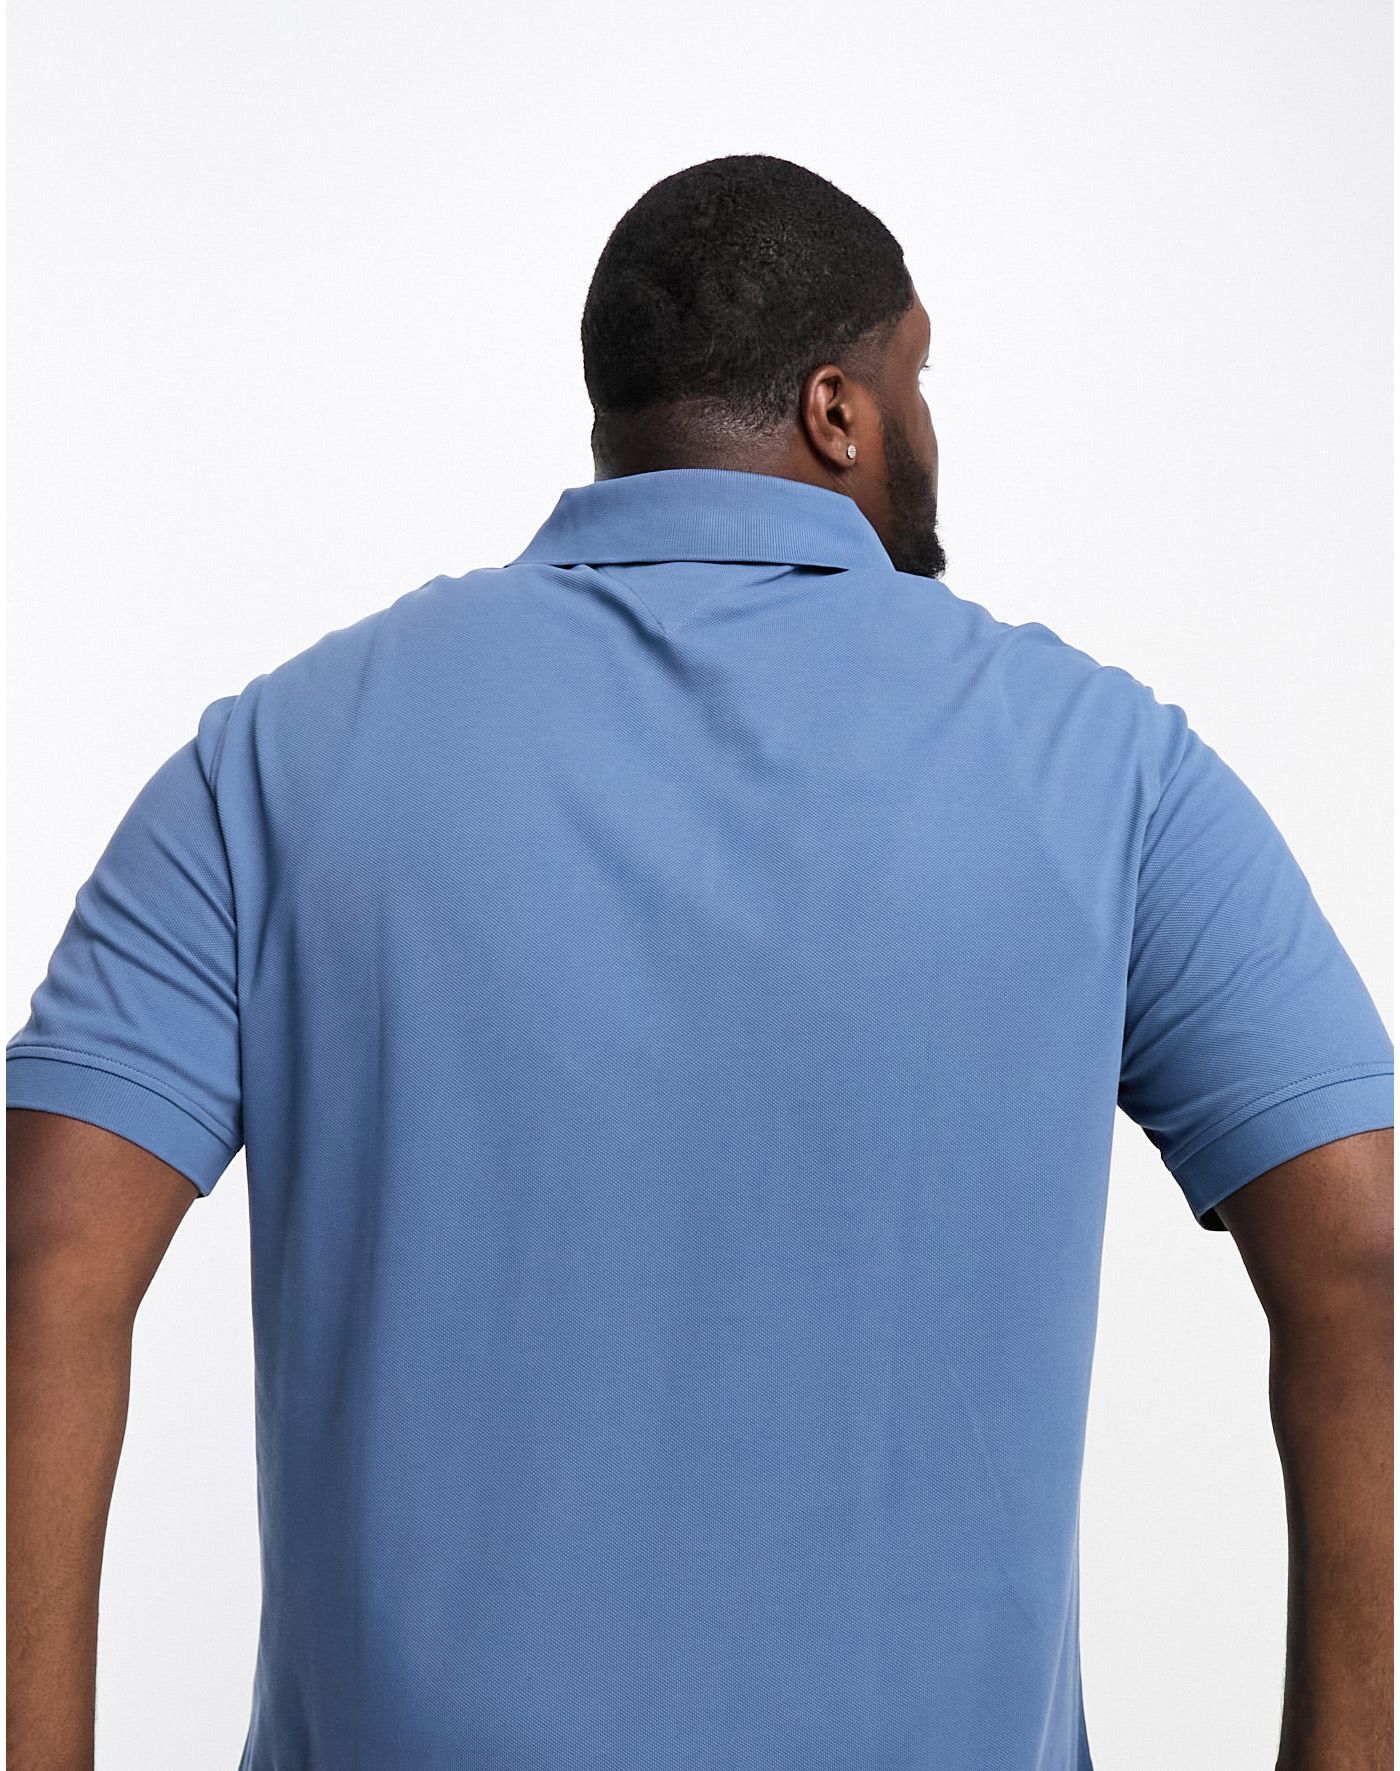 Tommy Hilfiger Big & Tall regular fit polo top in light blue